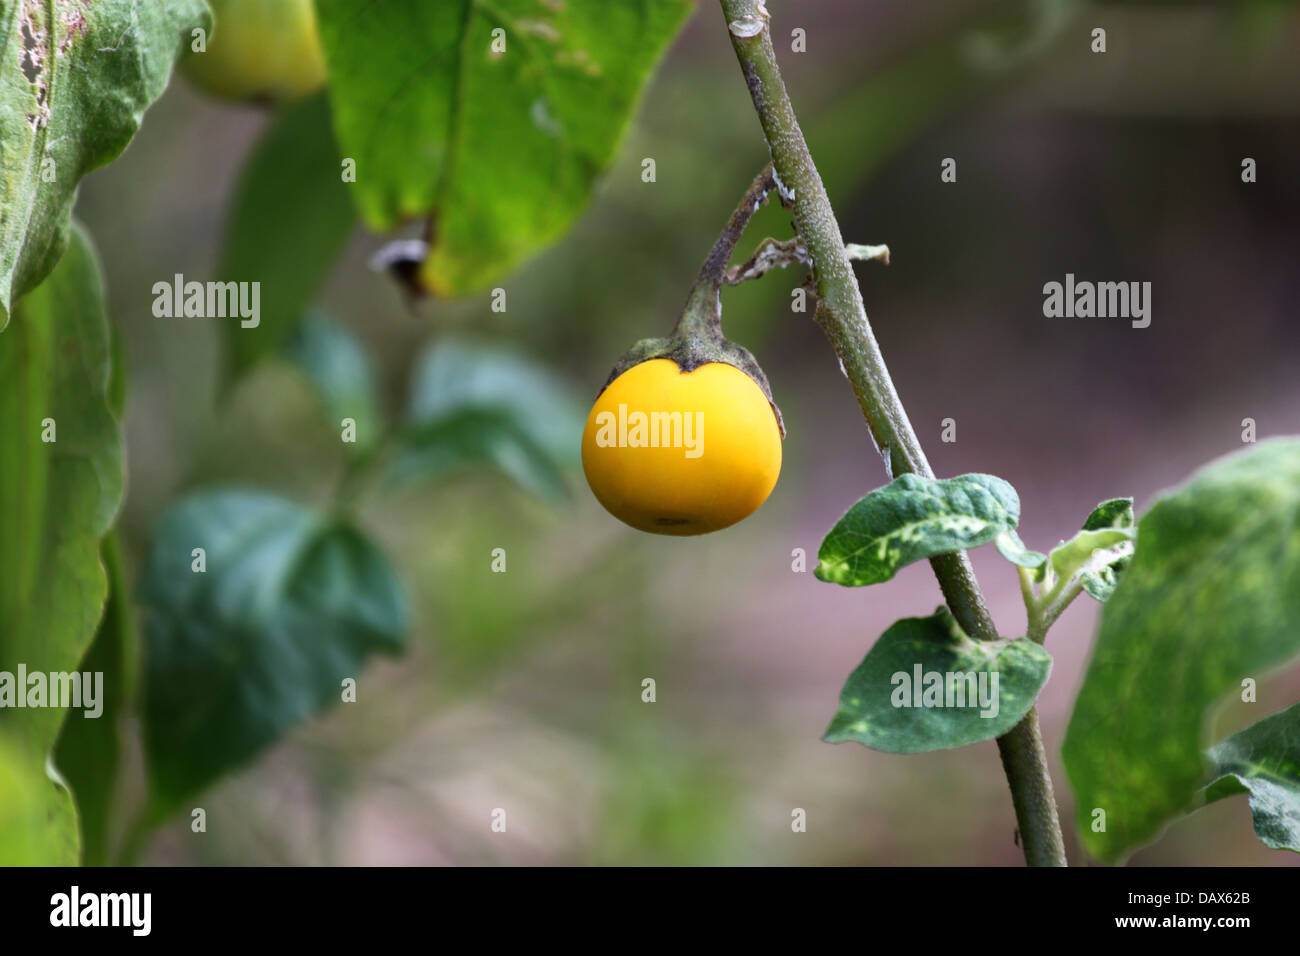 The Eggplant is yellow color in the garden. Stock Photo